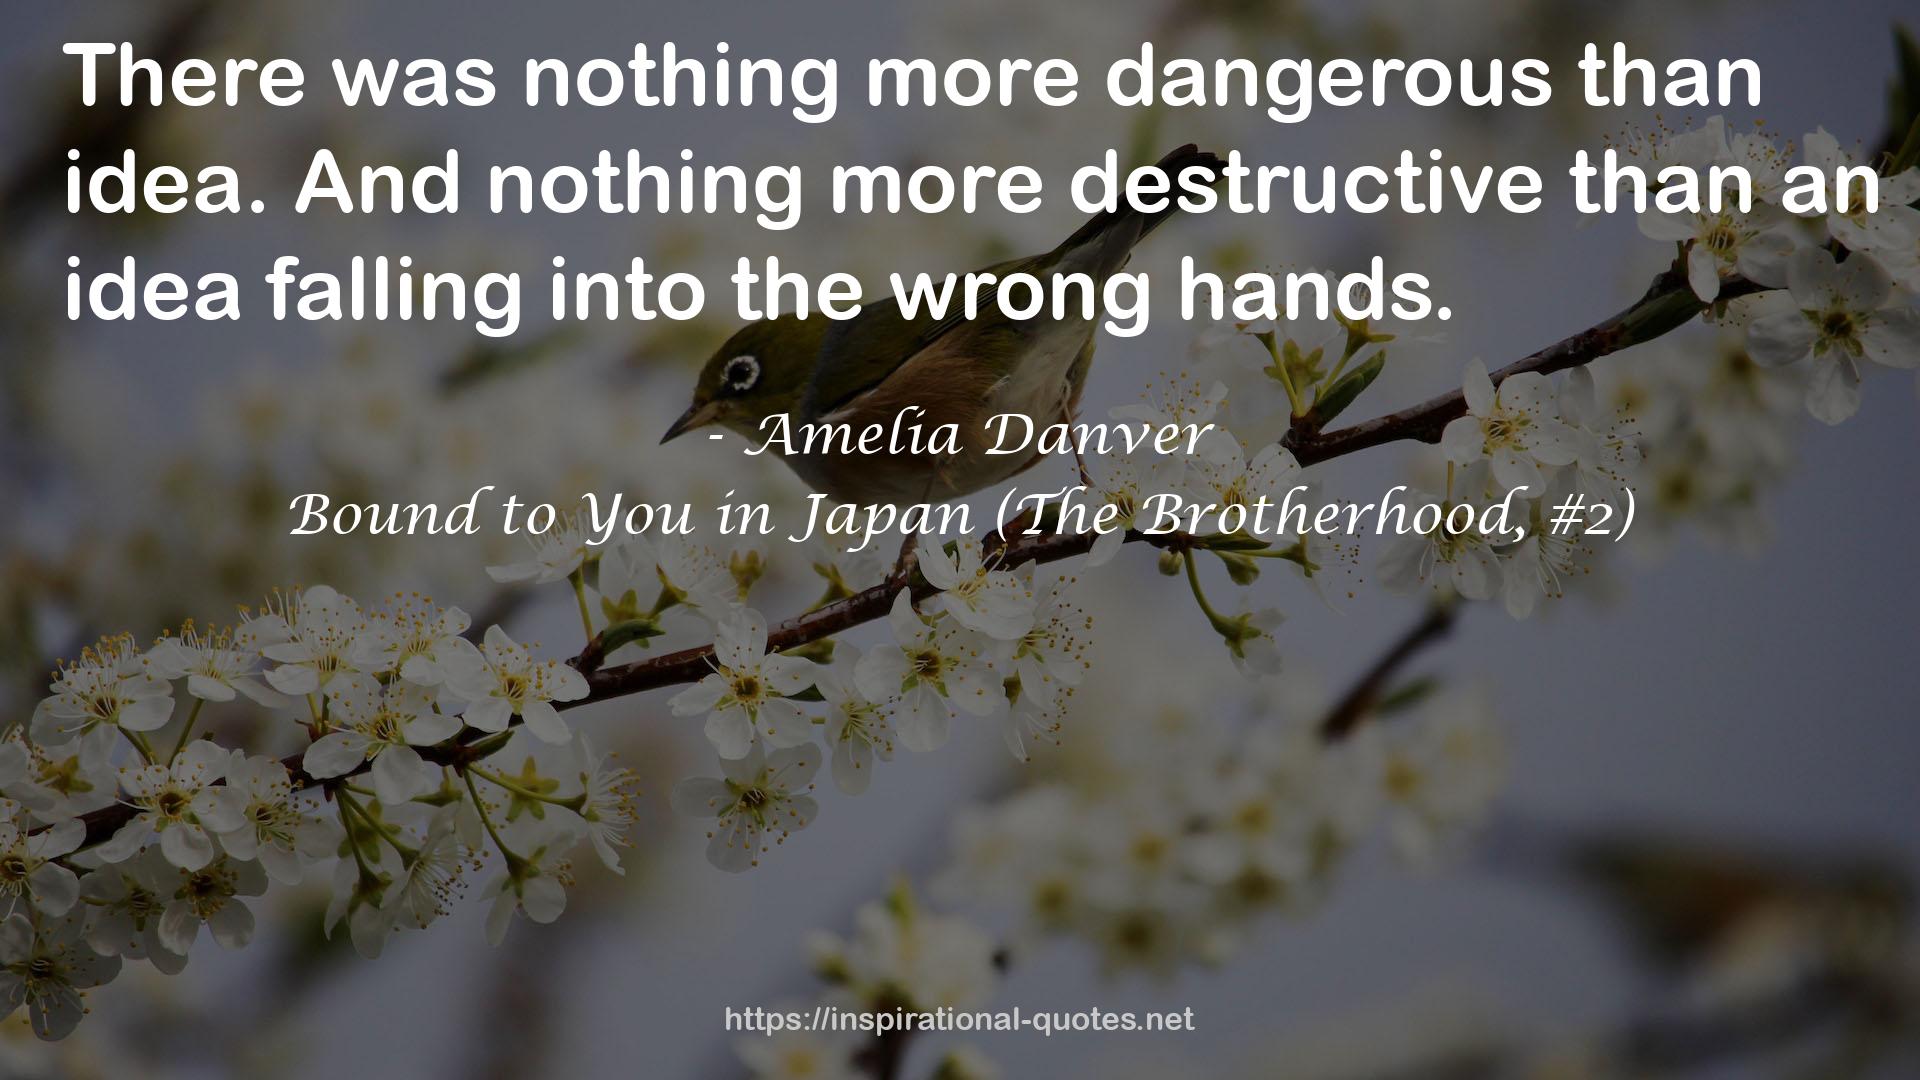 Bound to You in Japan (The Brotherhood, #2) QUOTES